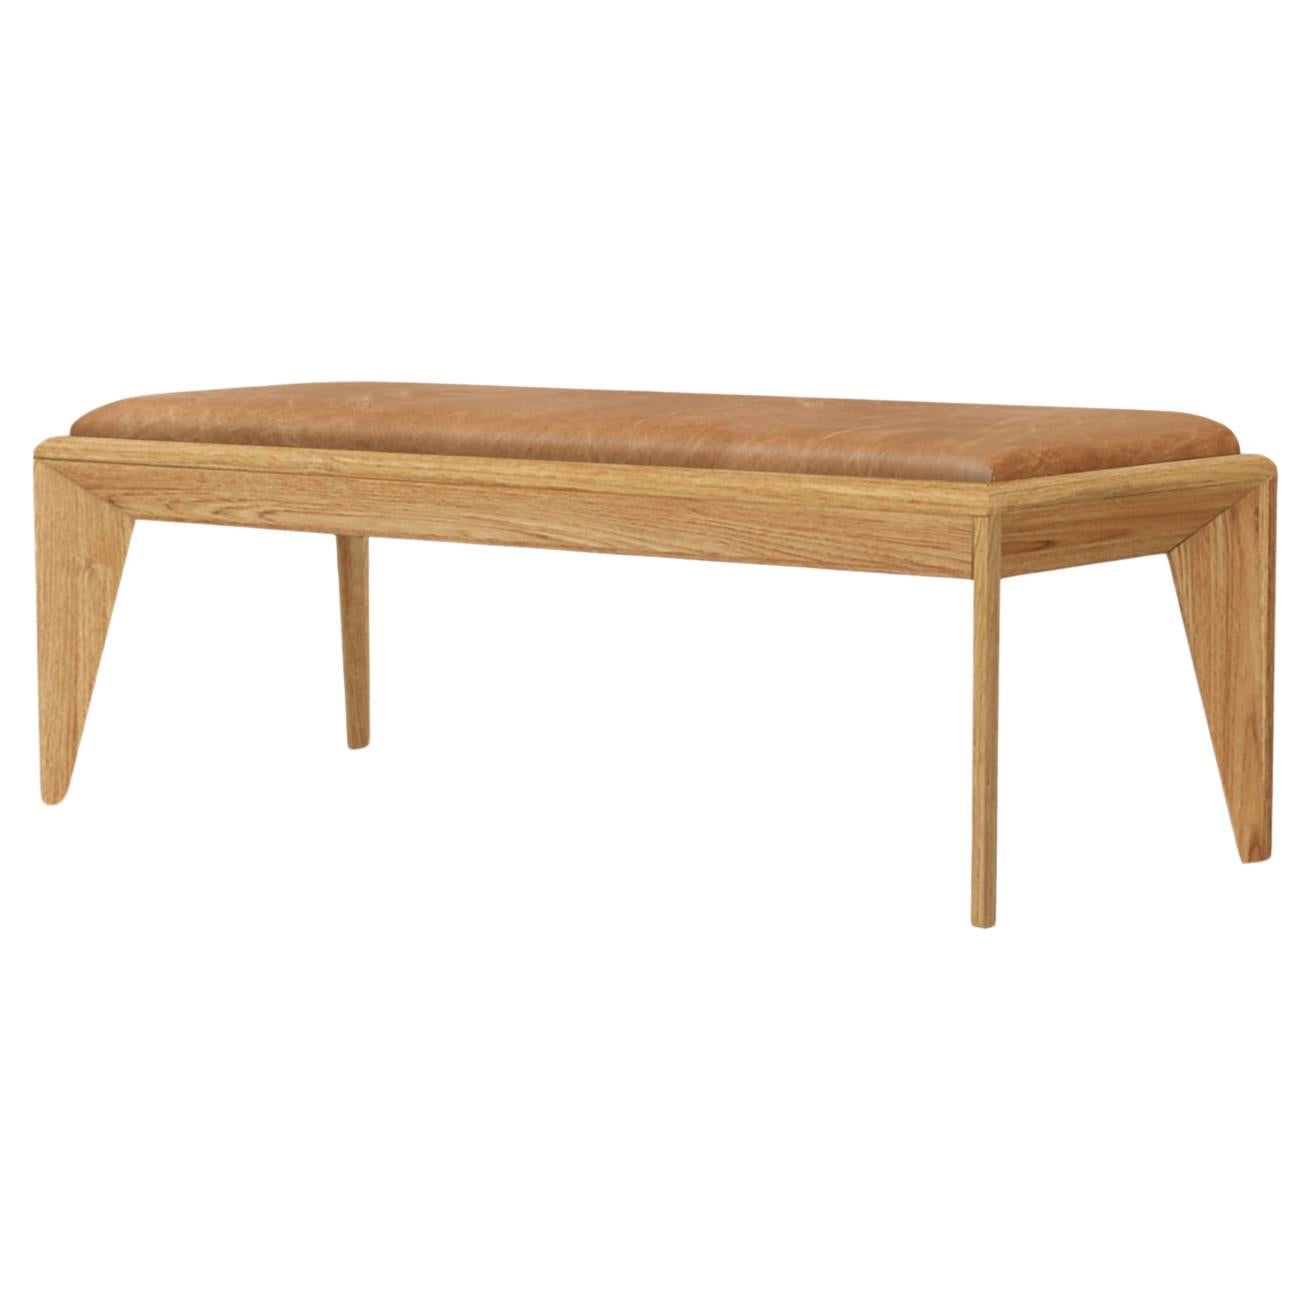 Volpi bench in natural wood and fabric seat For Sale